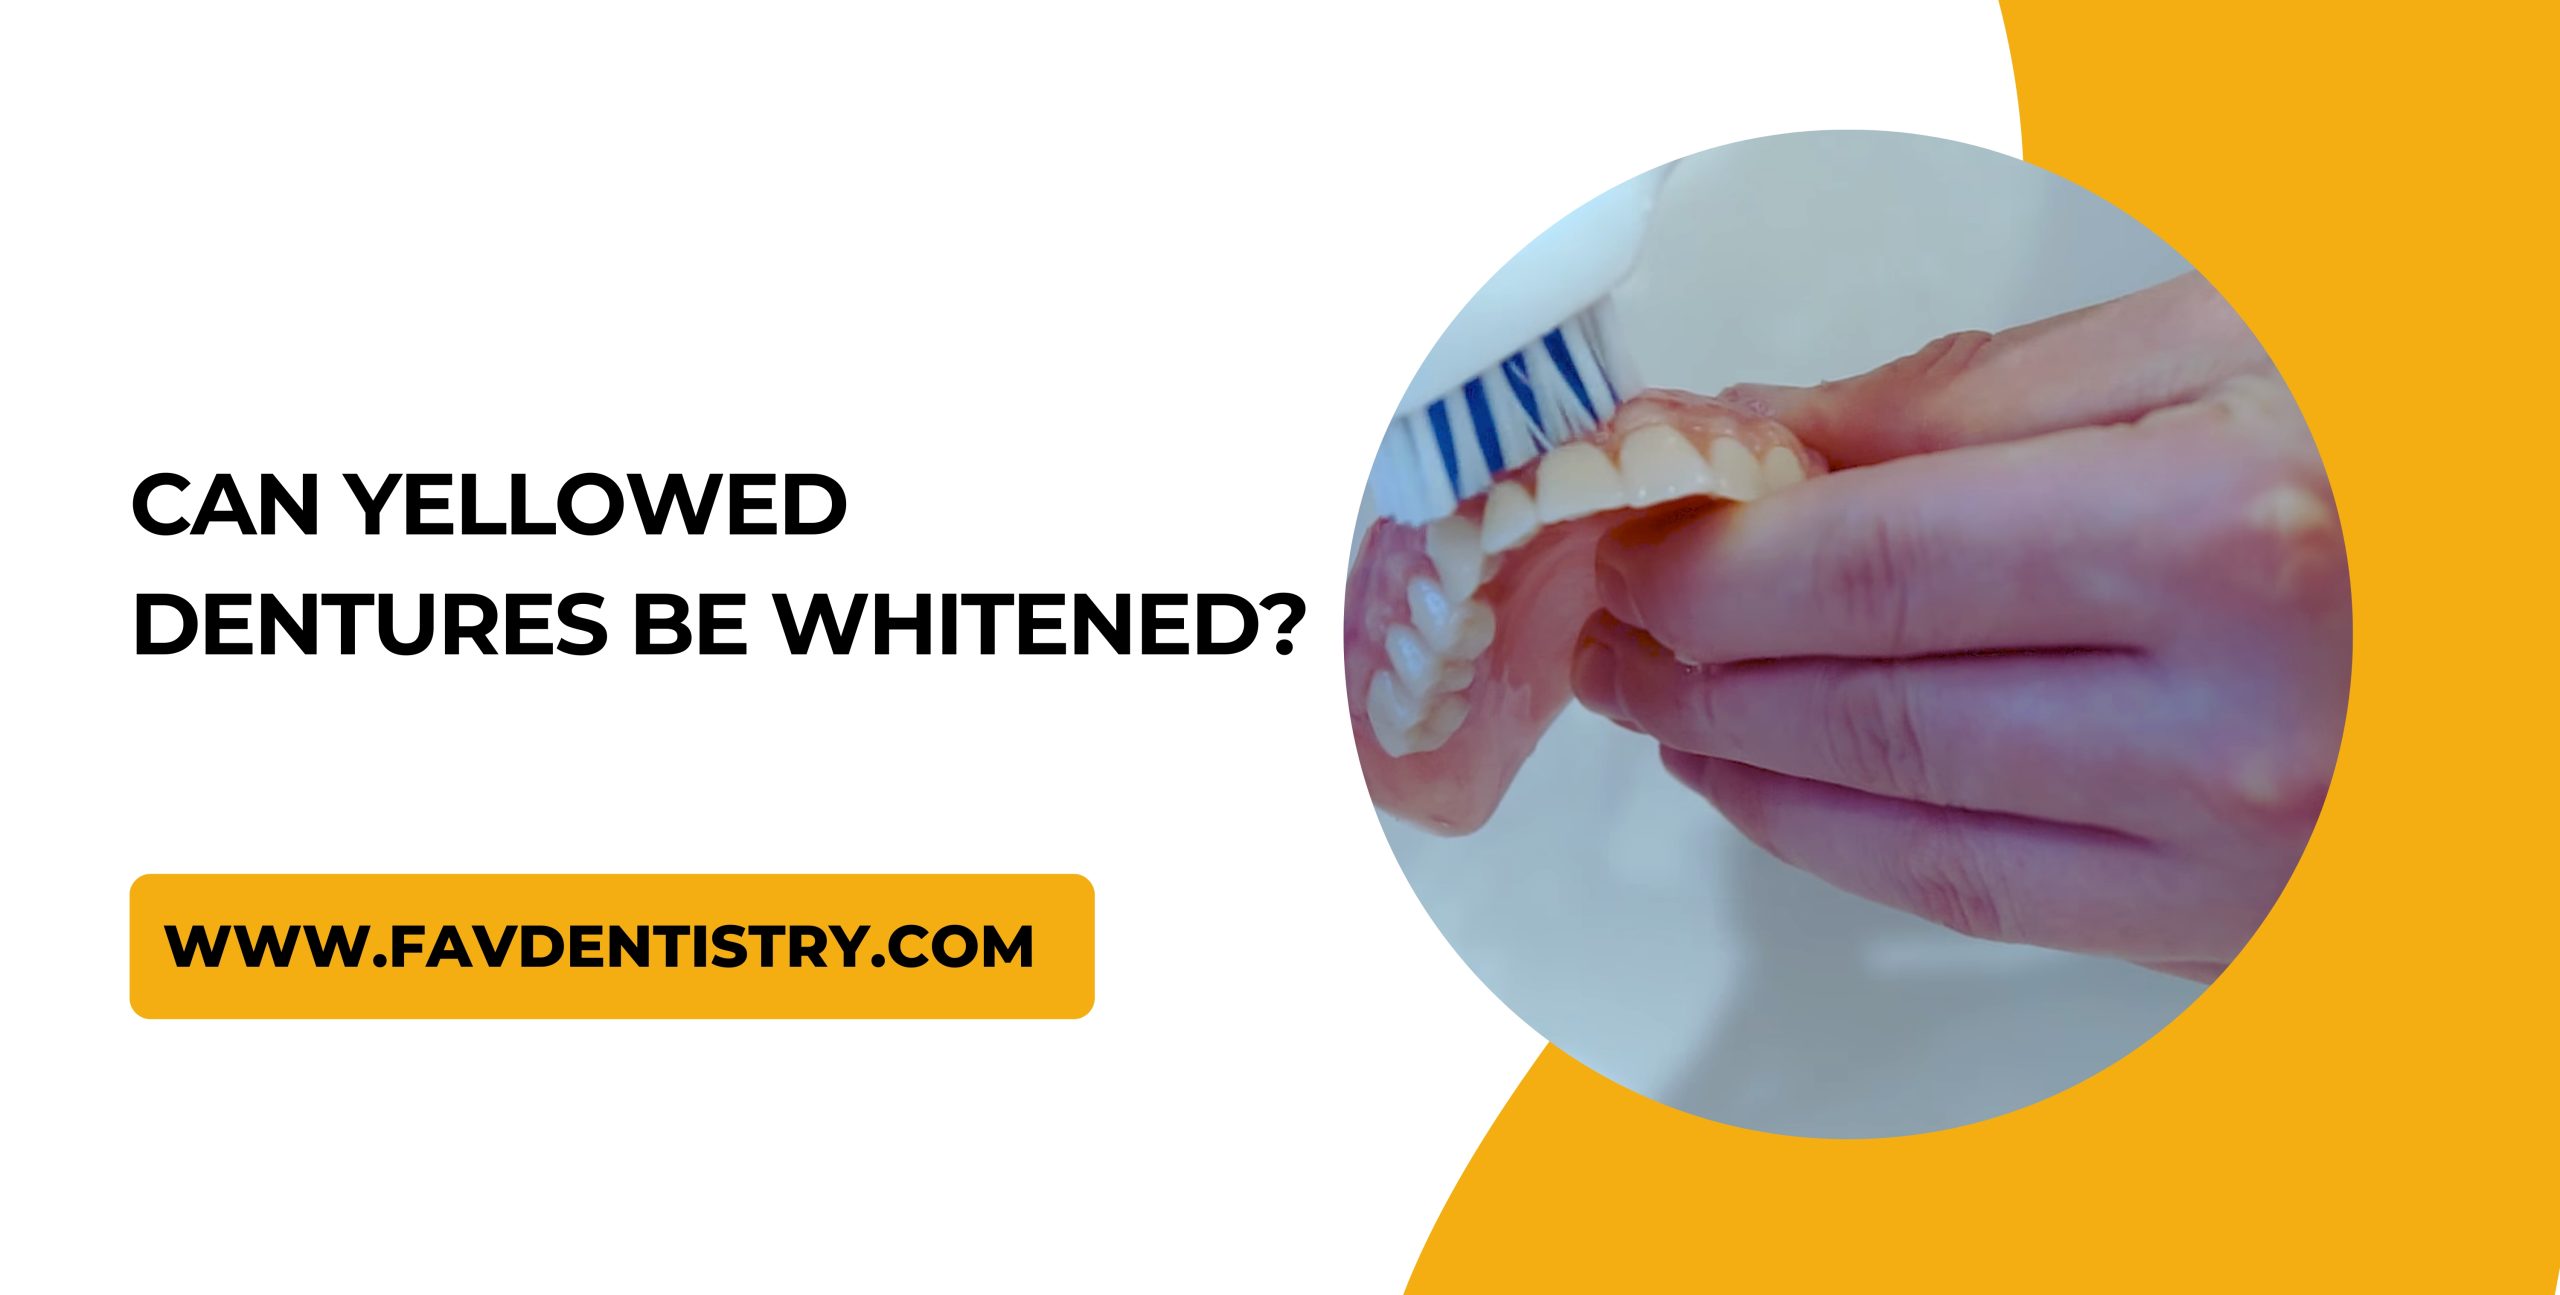 Can Yellowed Dentures Be Whitened?